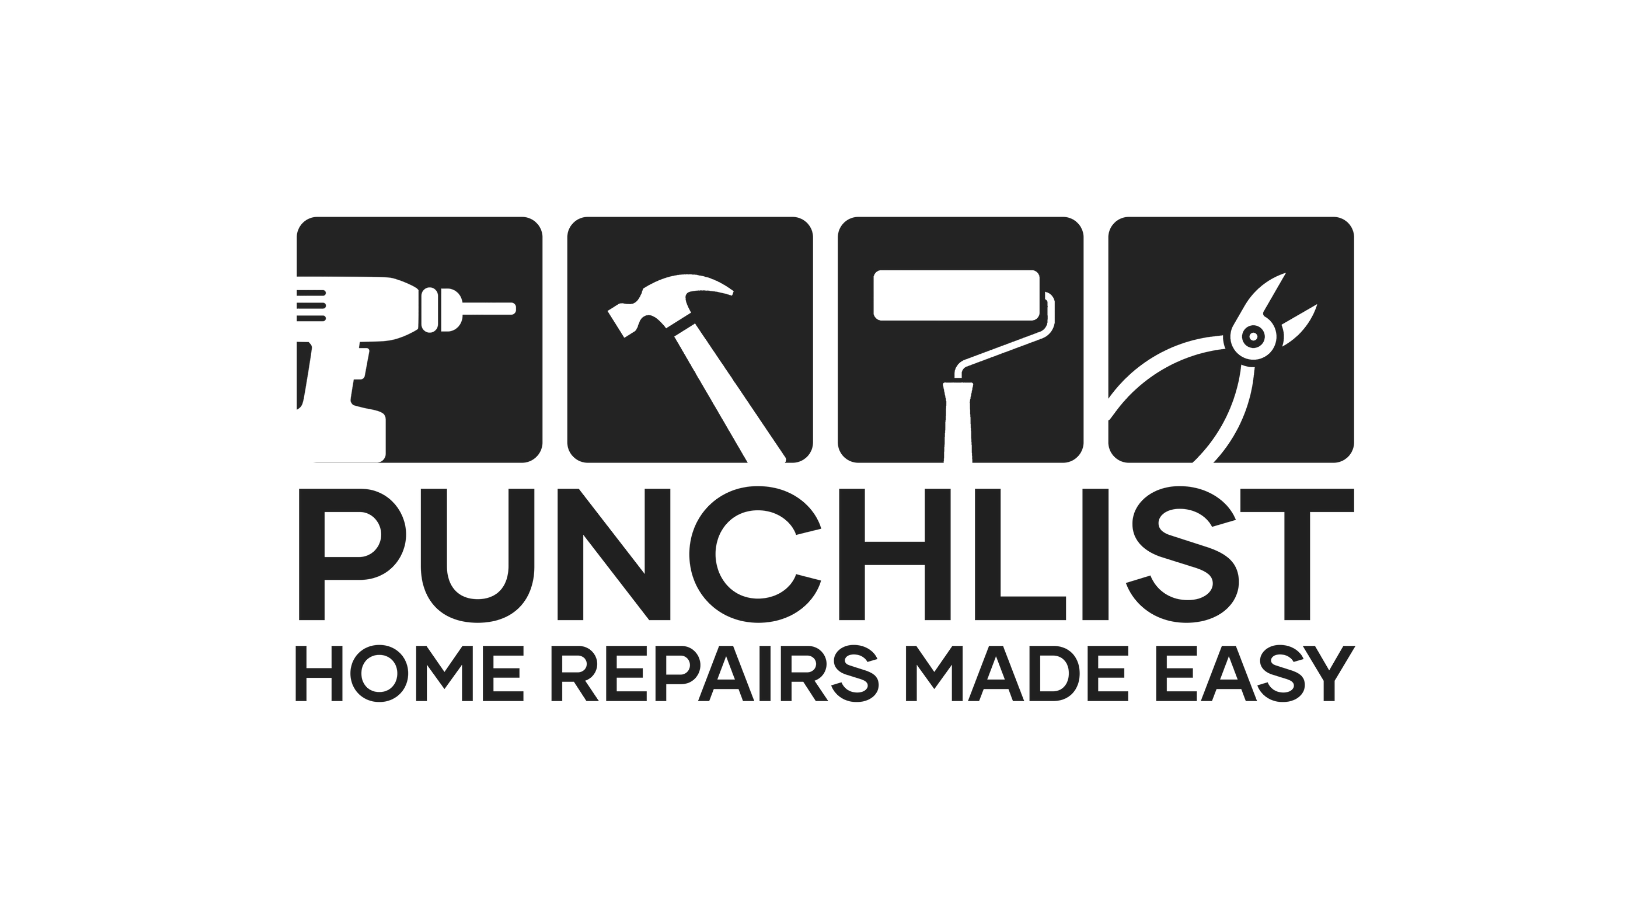 Punchlist Home Repairs PROPERTY EMPIRE Michael Real Estate Group Cheraw SC